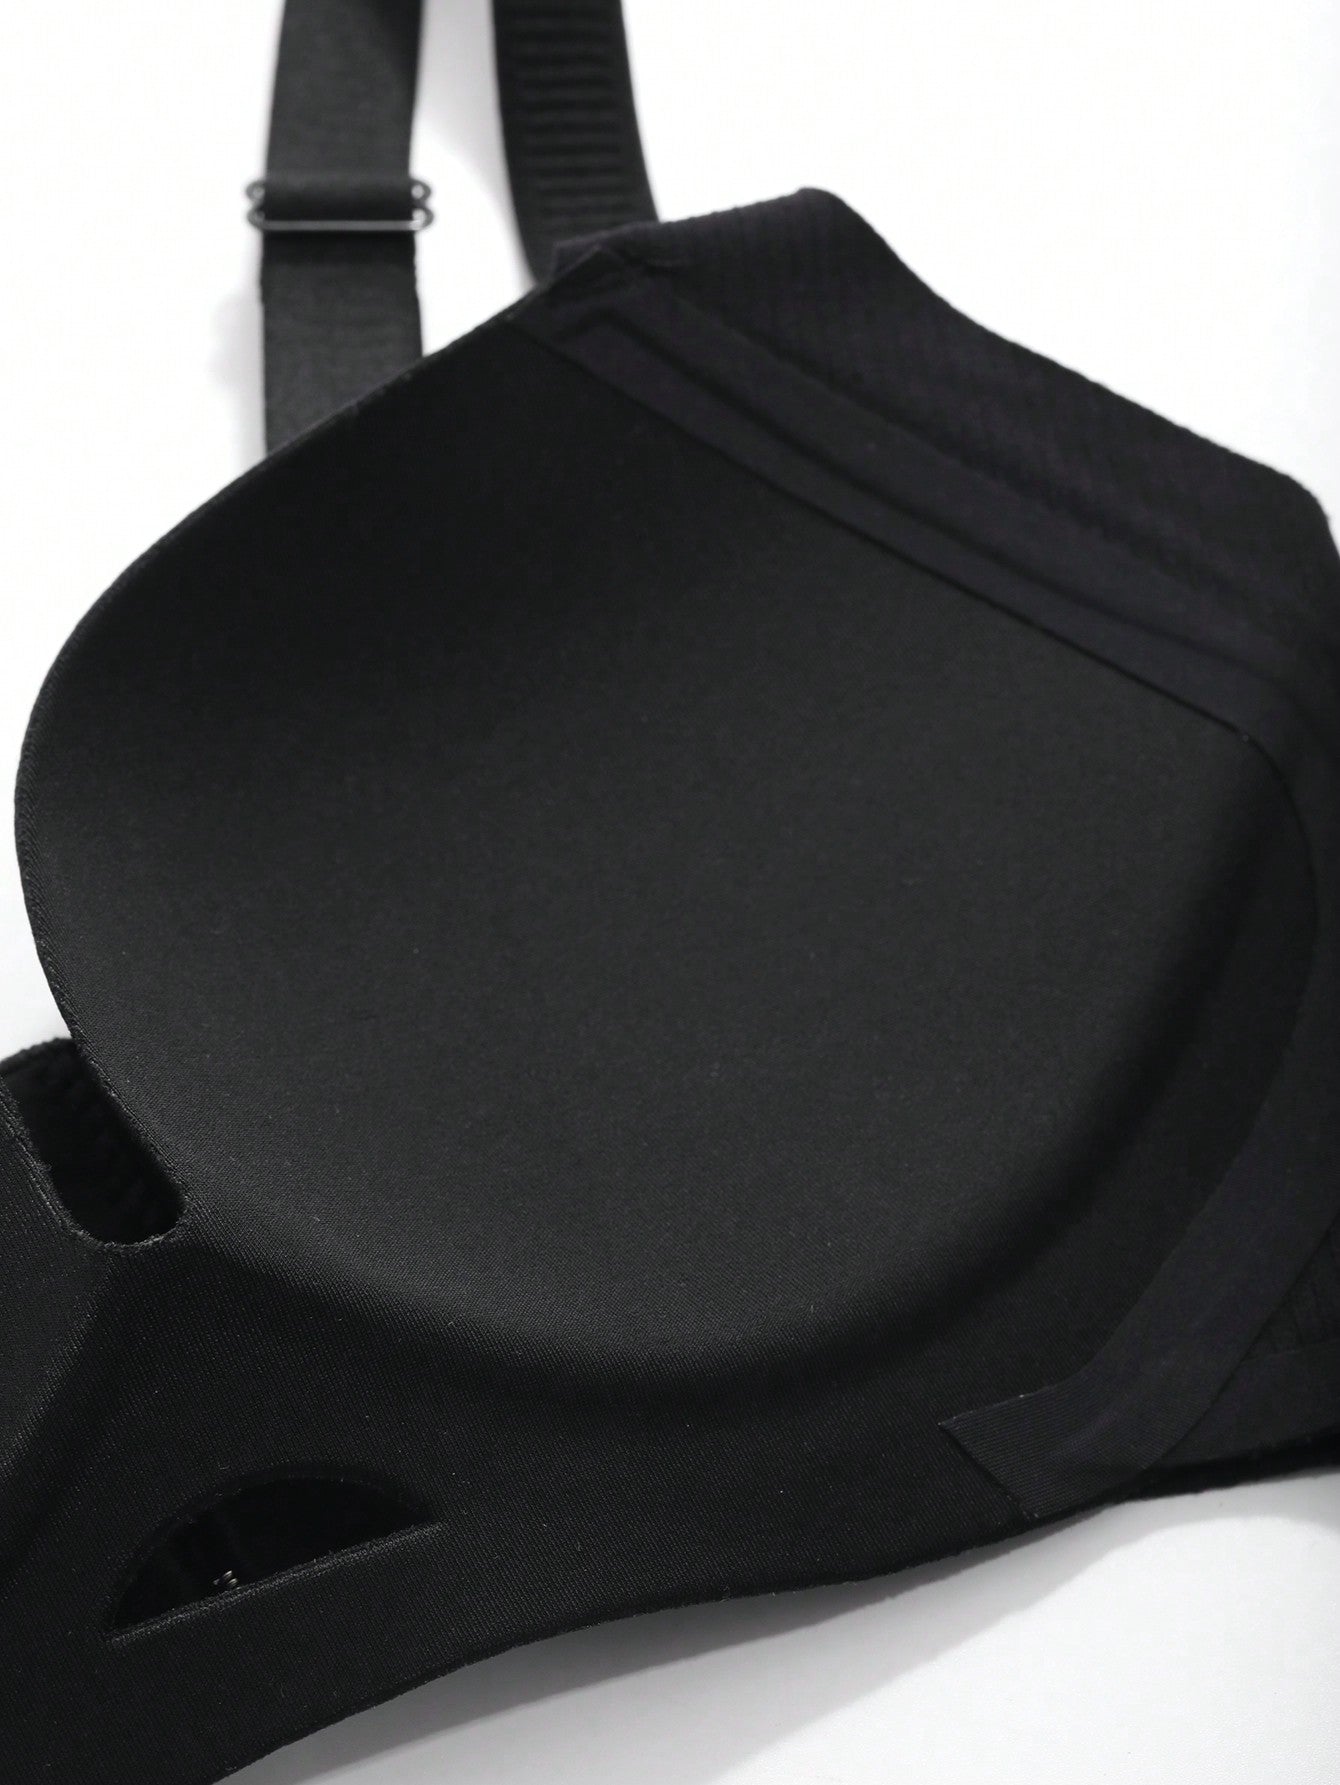 Seamless Comfort Bra Without Underwire For Small-Chested Women